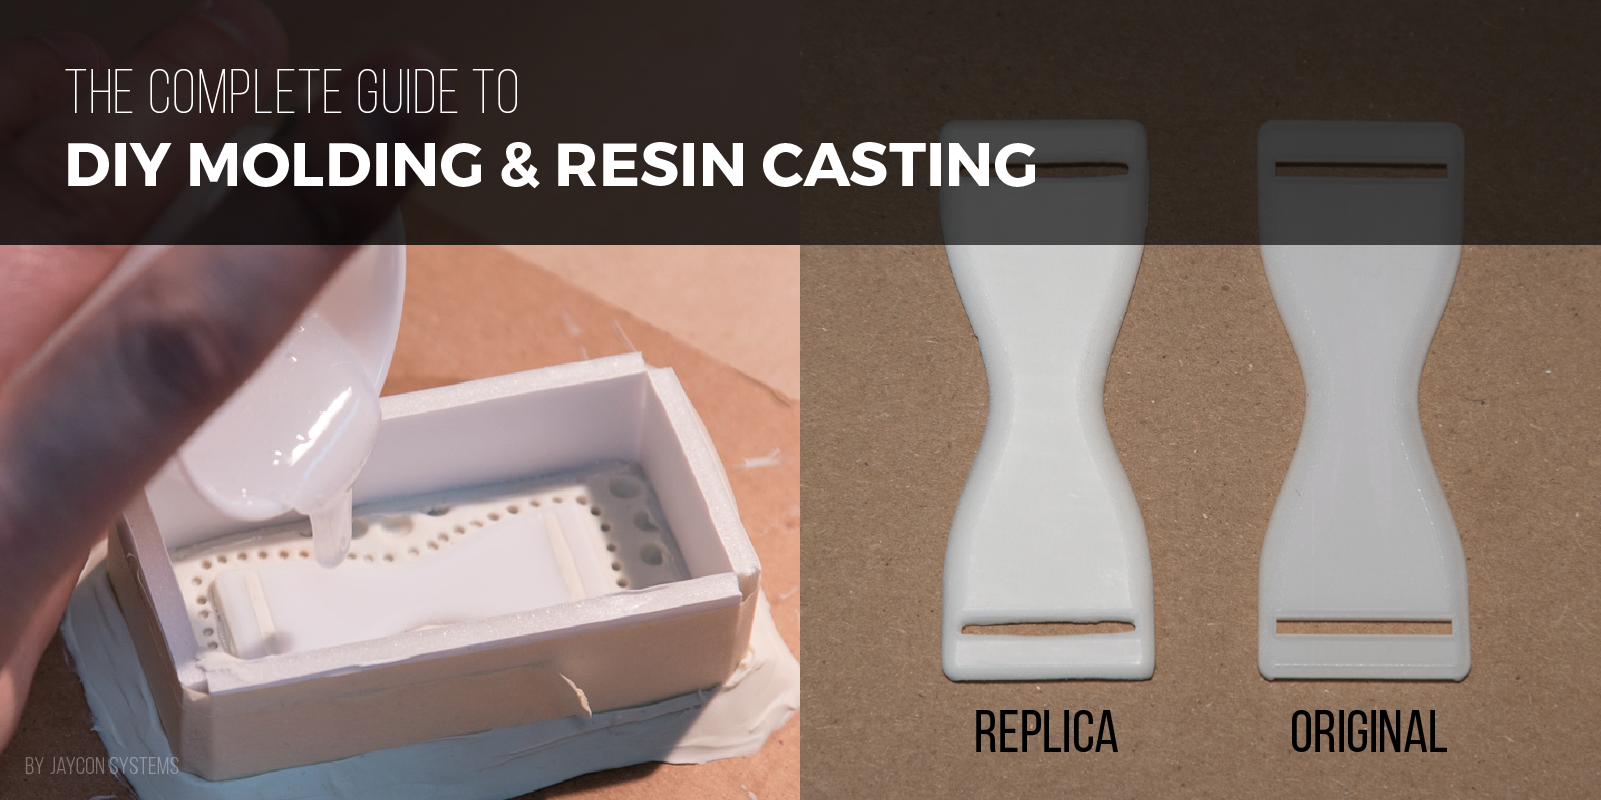 The Complete Guide to DIY Molding & Resin Casting